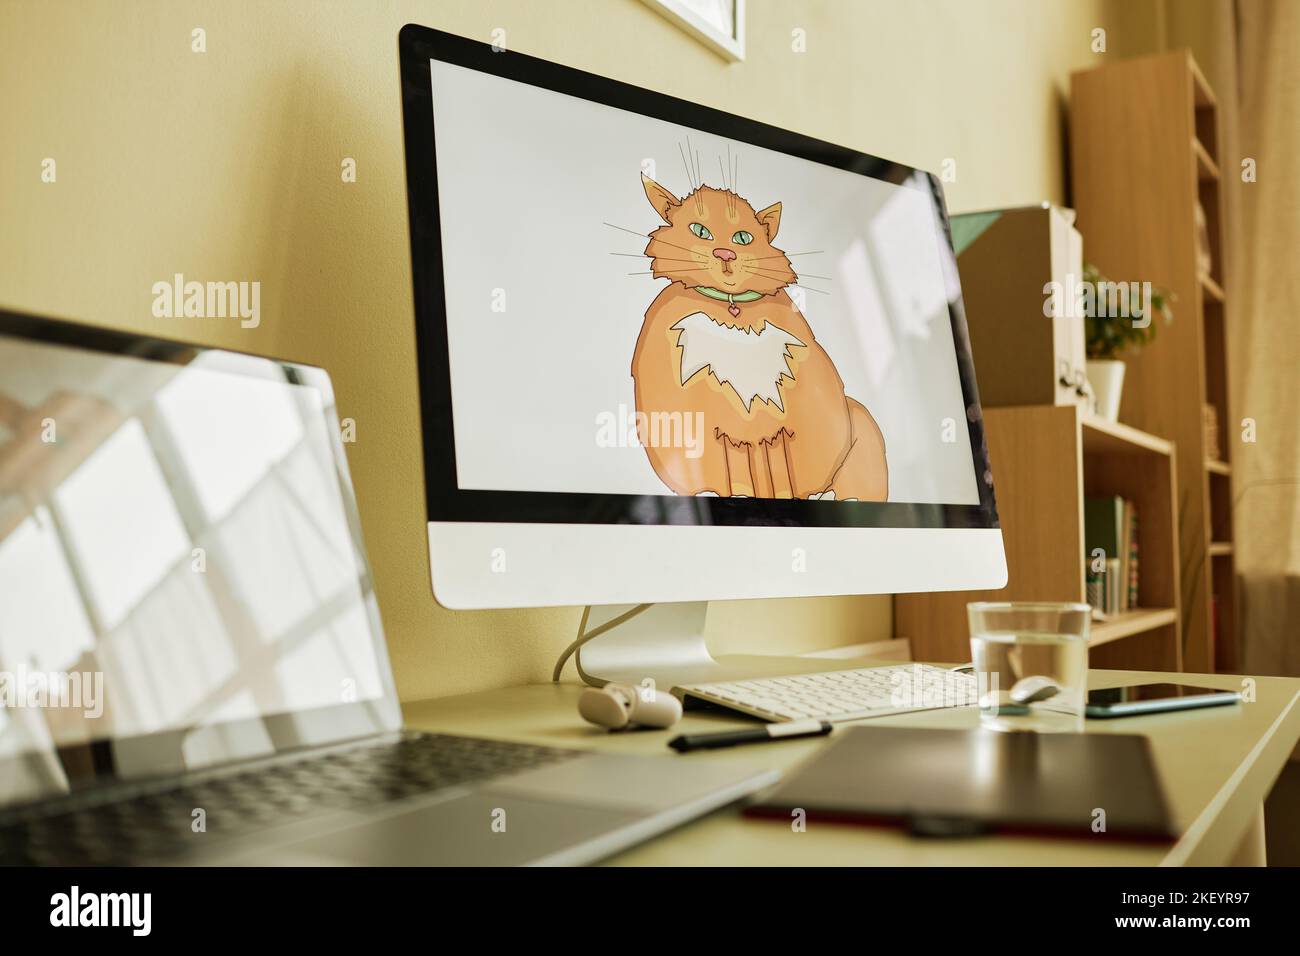 Focus on computer screen with graphic picture of fat and fluffy ginger cat on white background drawn by modern digital artist Stock Photo